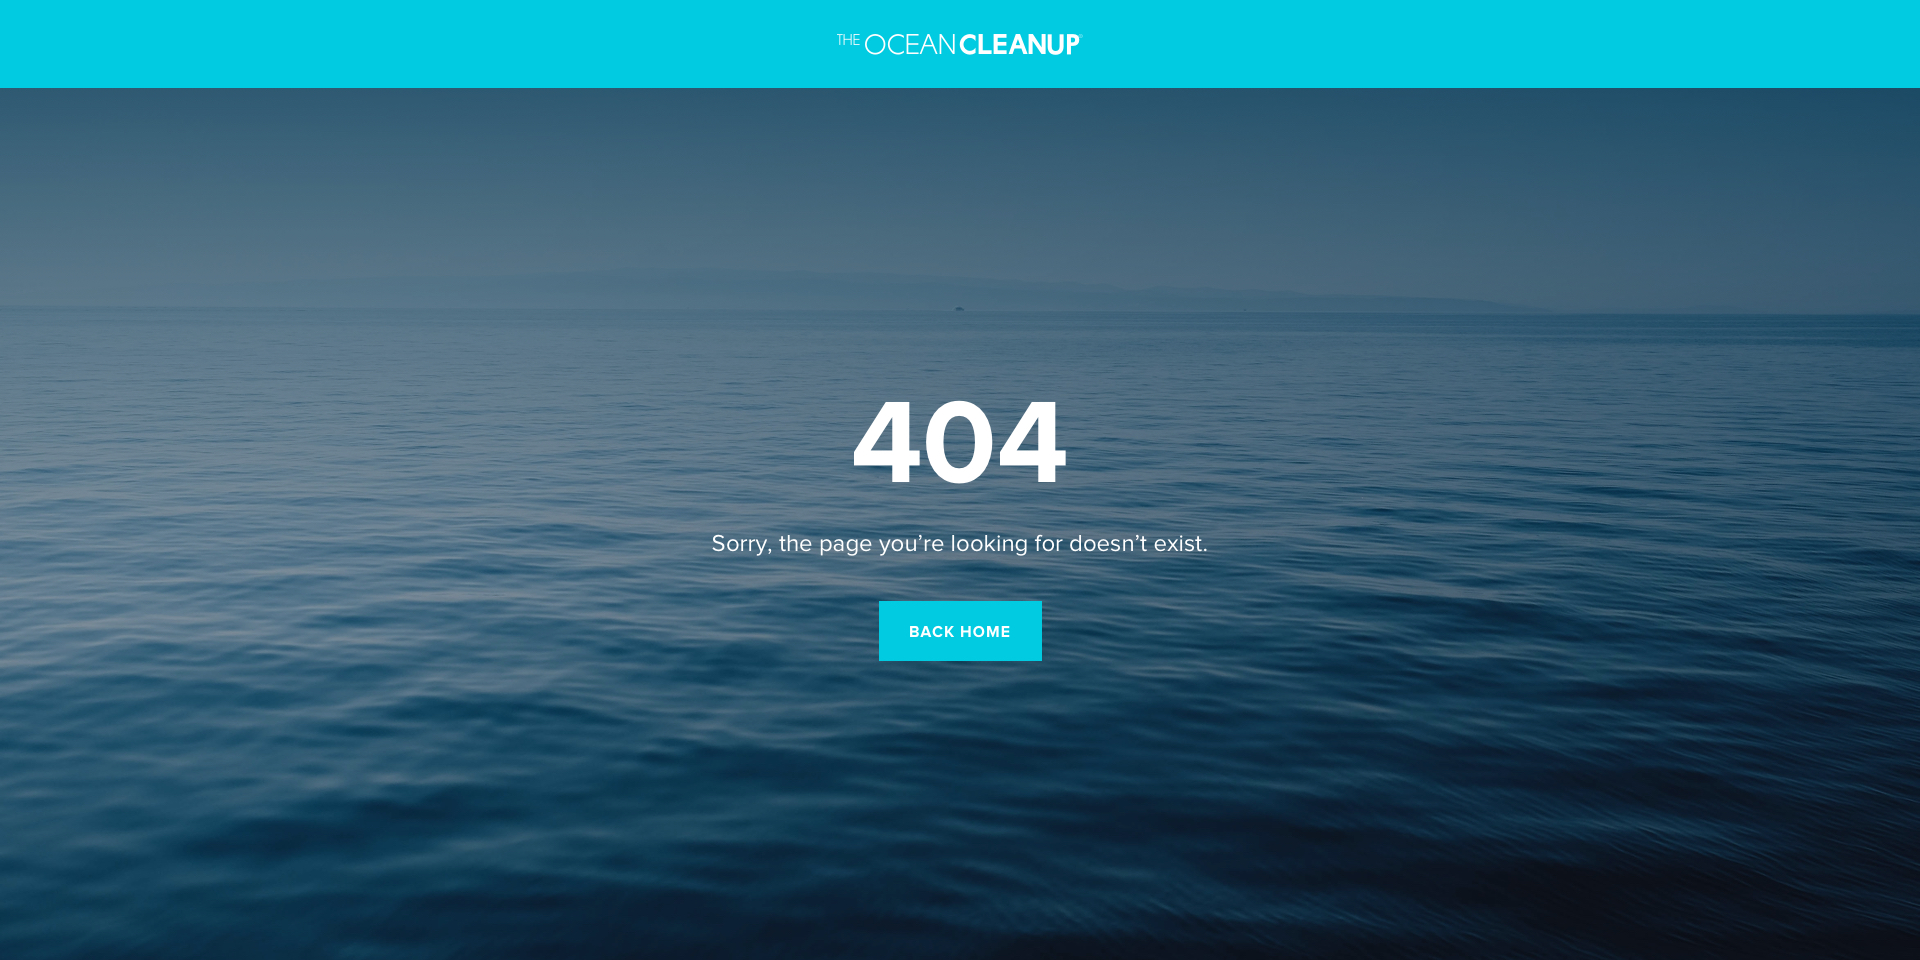 The Ocean Cleanup site inner page